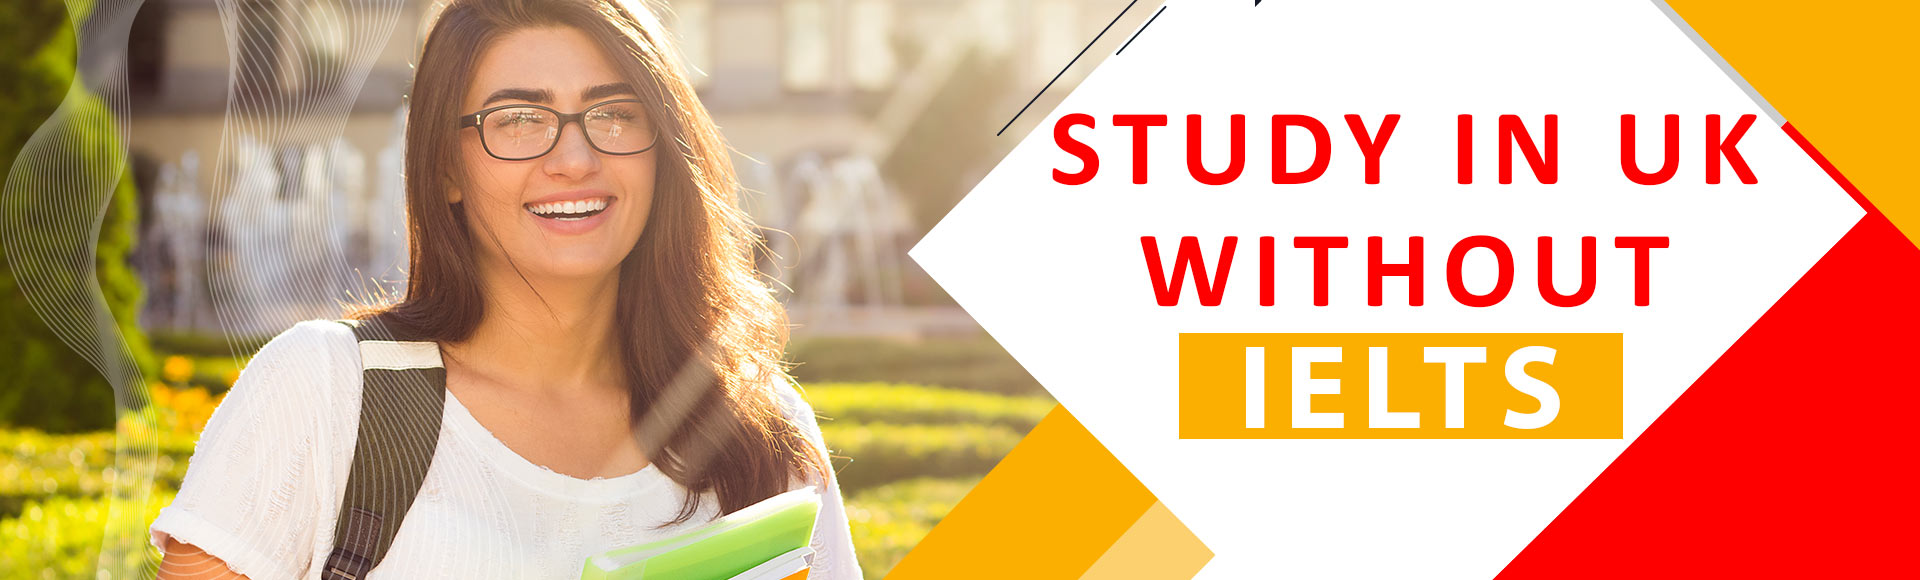 Study in the UK without IELTS